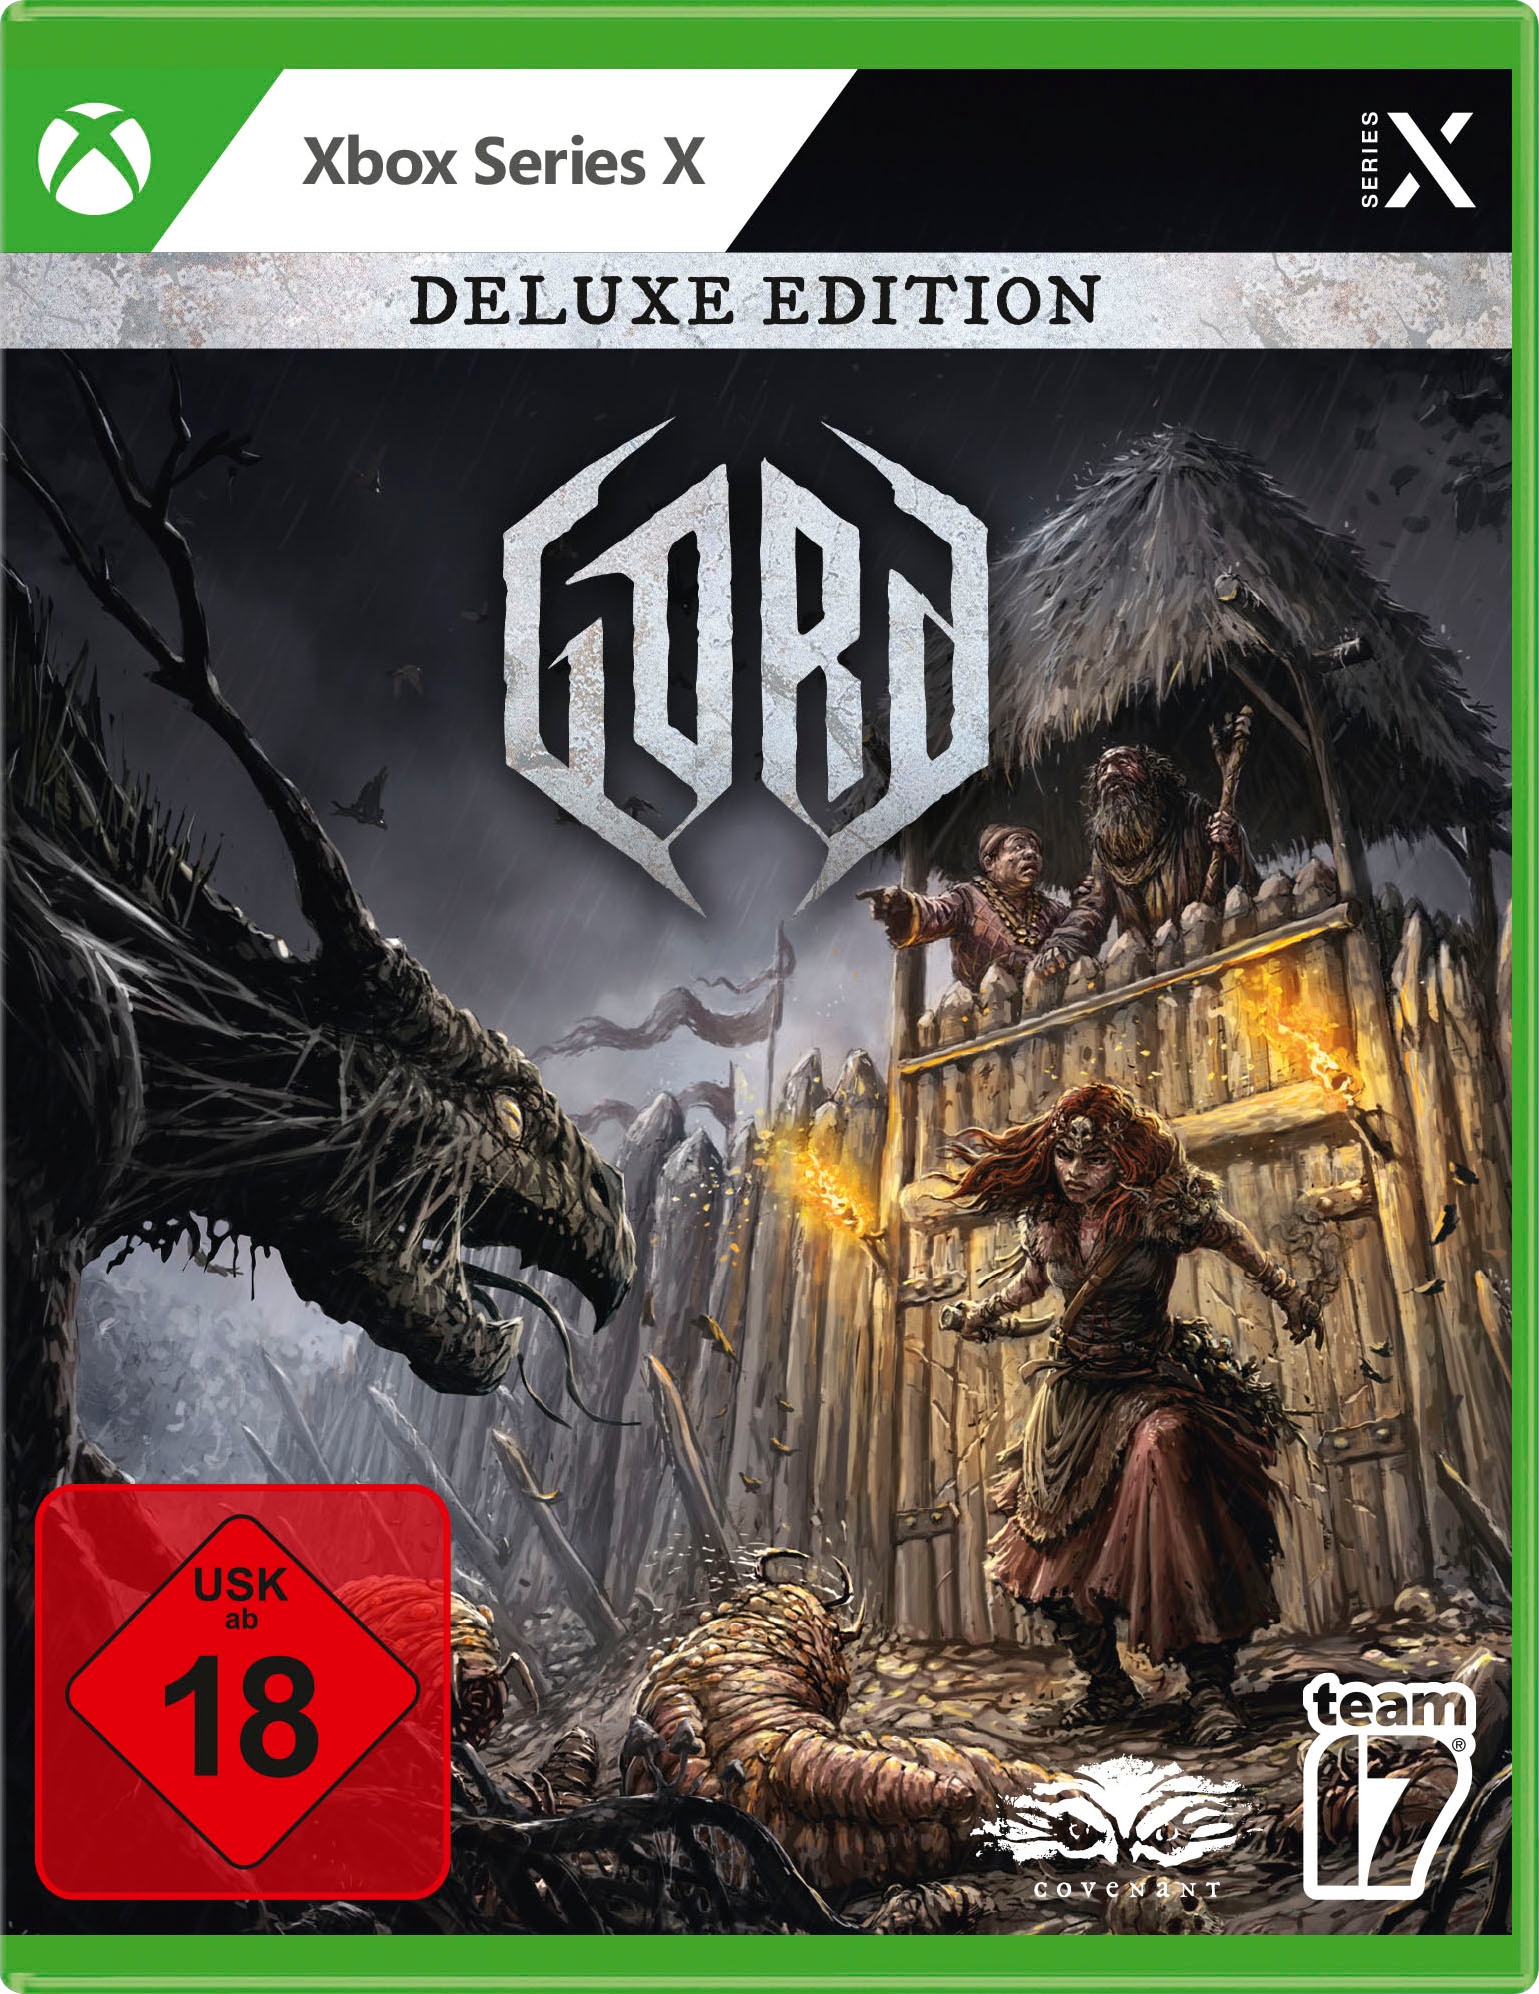 Spielesoftware »Gord Deluxe Edition«, Xbox Series X